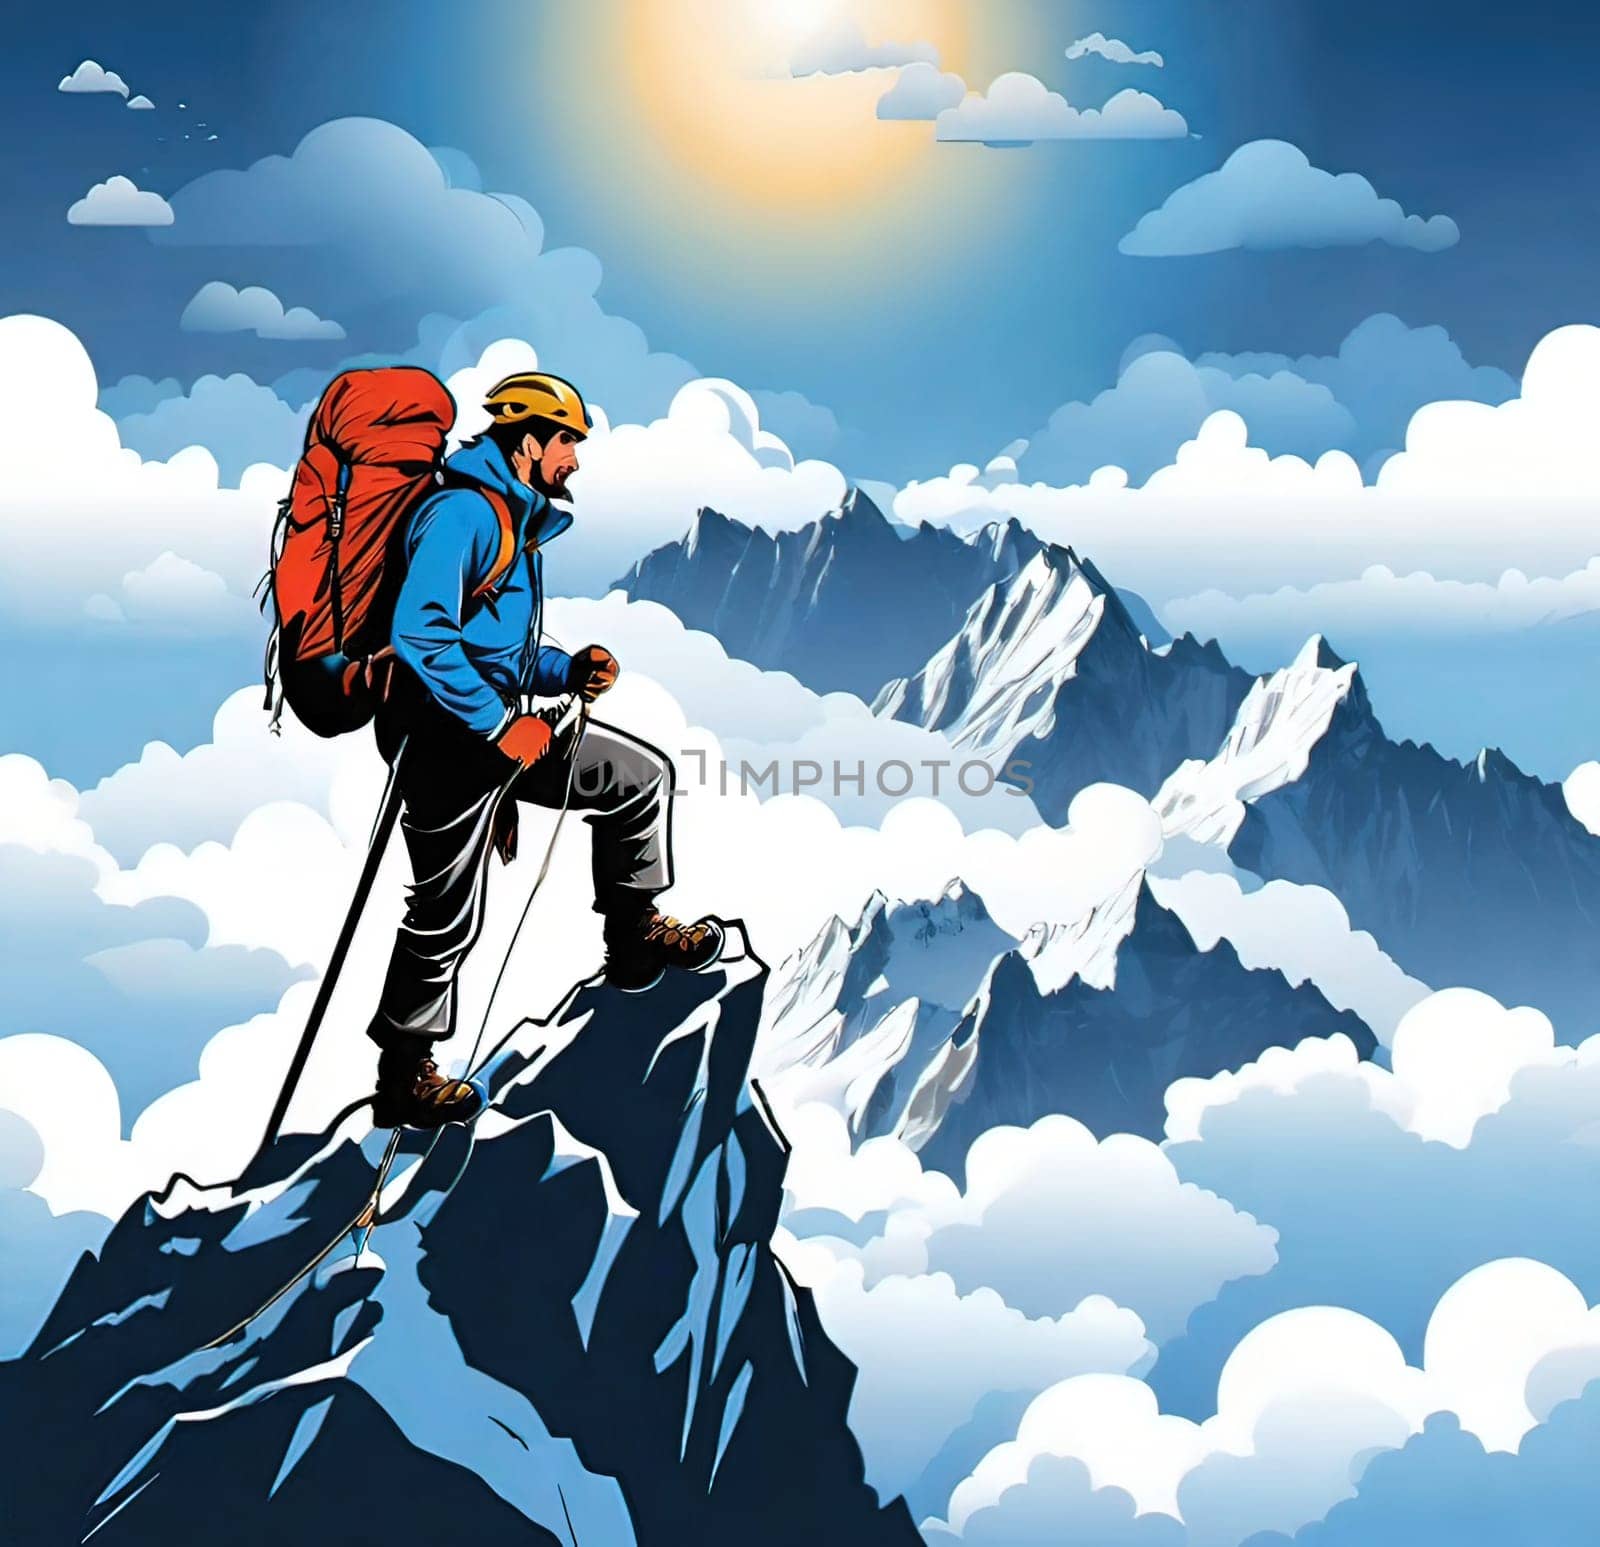 Hiker on the top of the mountain with a backpack. Vector illustration. Business and sport concept.Vector illustration of mountaineer on the top of the mountain.Travel and adventure concept. Vector illustration of a man on the top of a mountain with a backpack